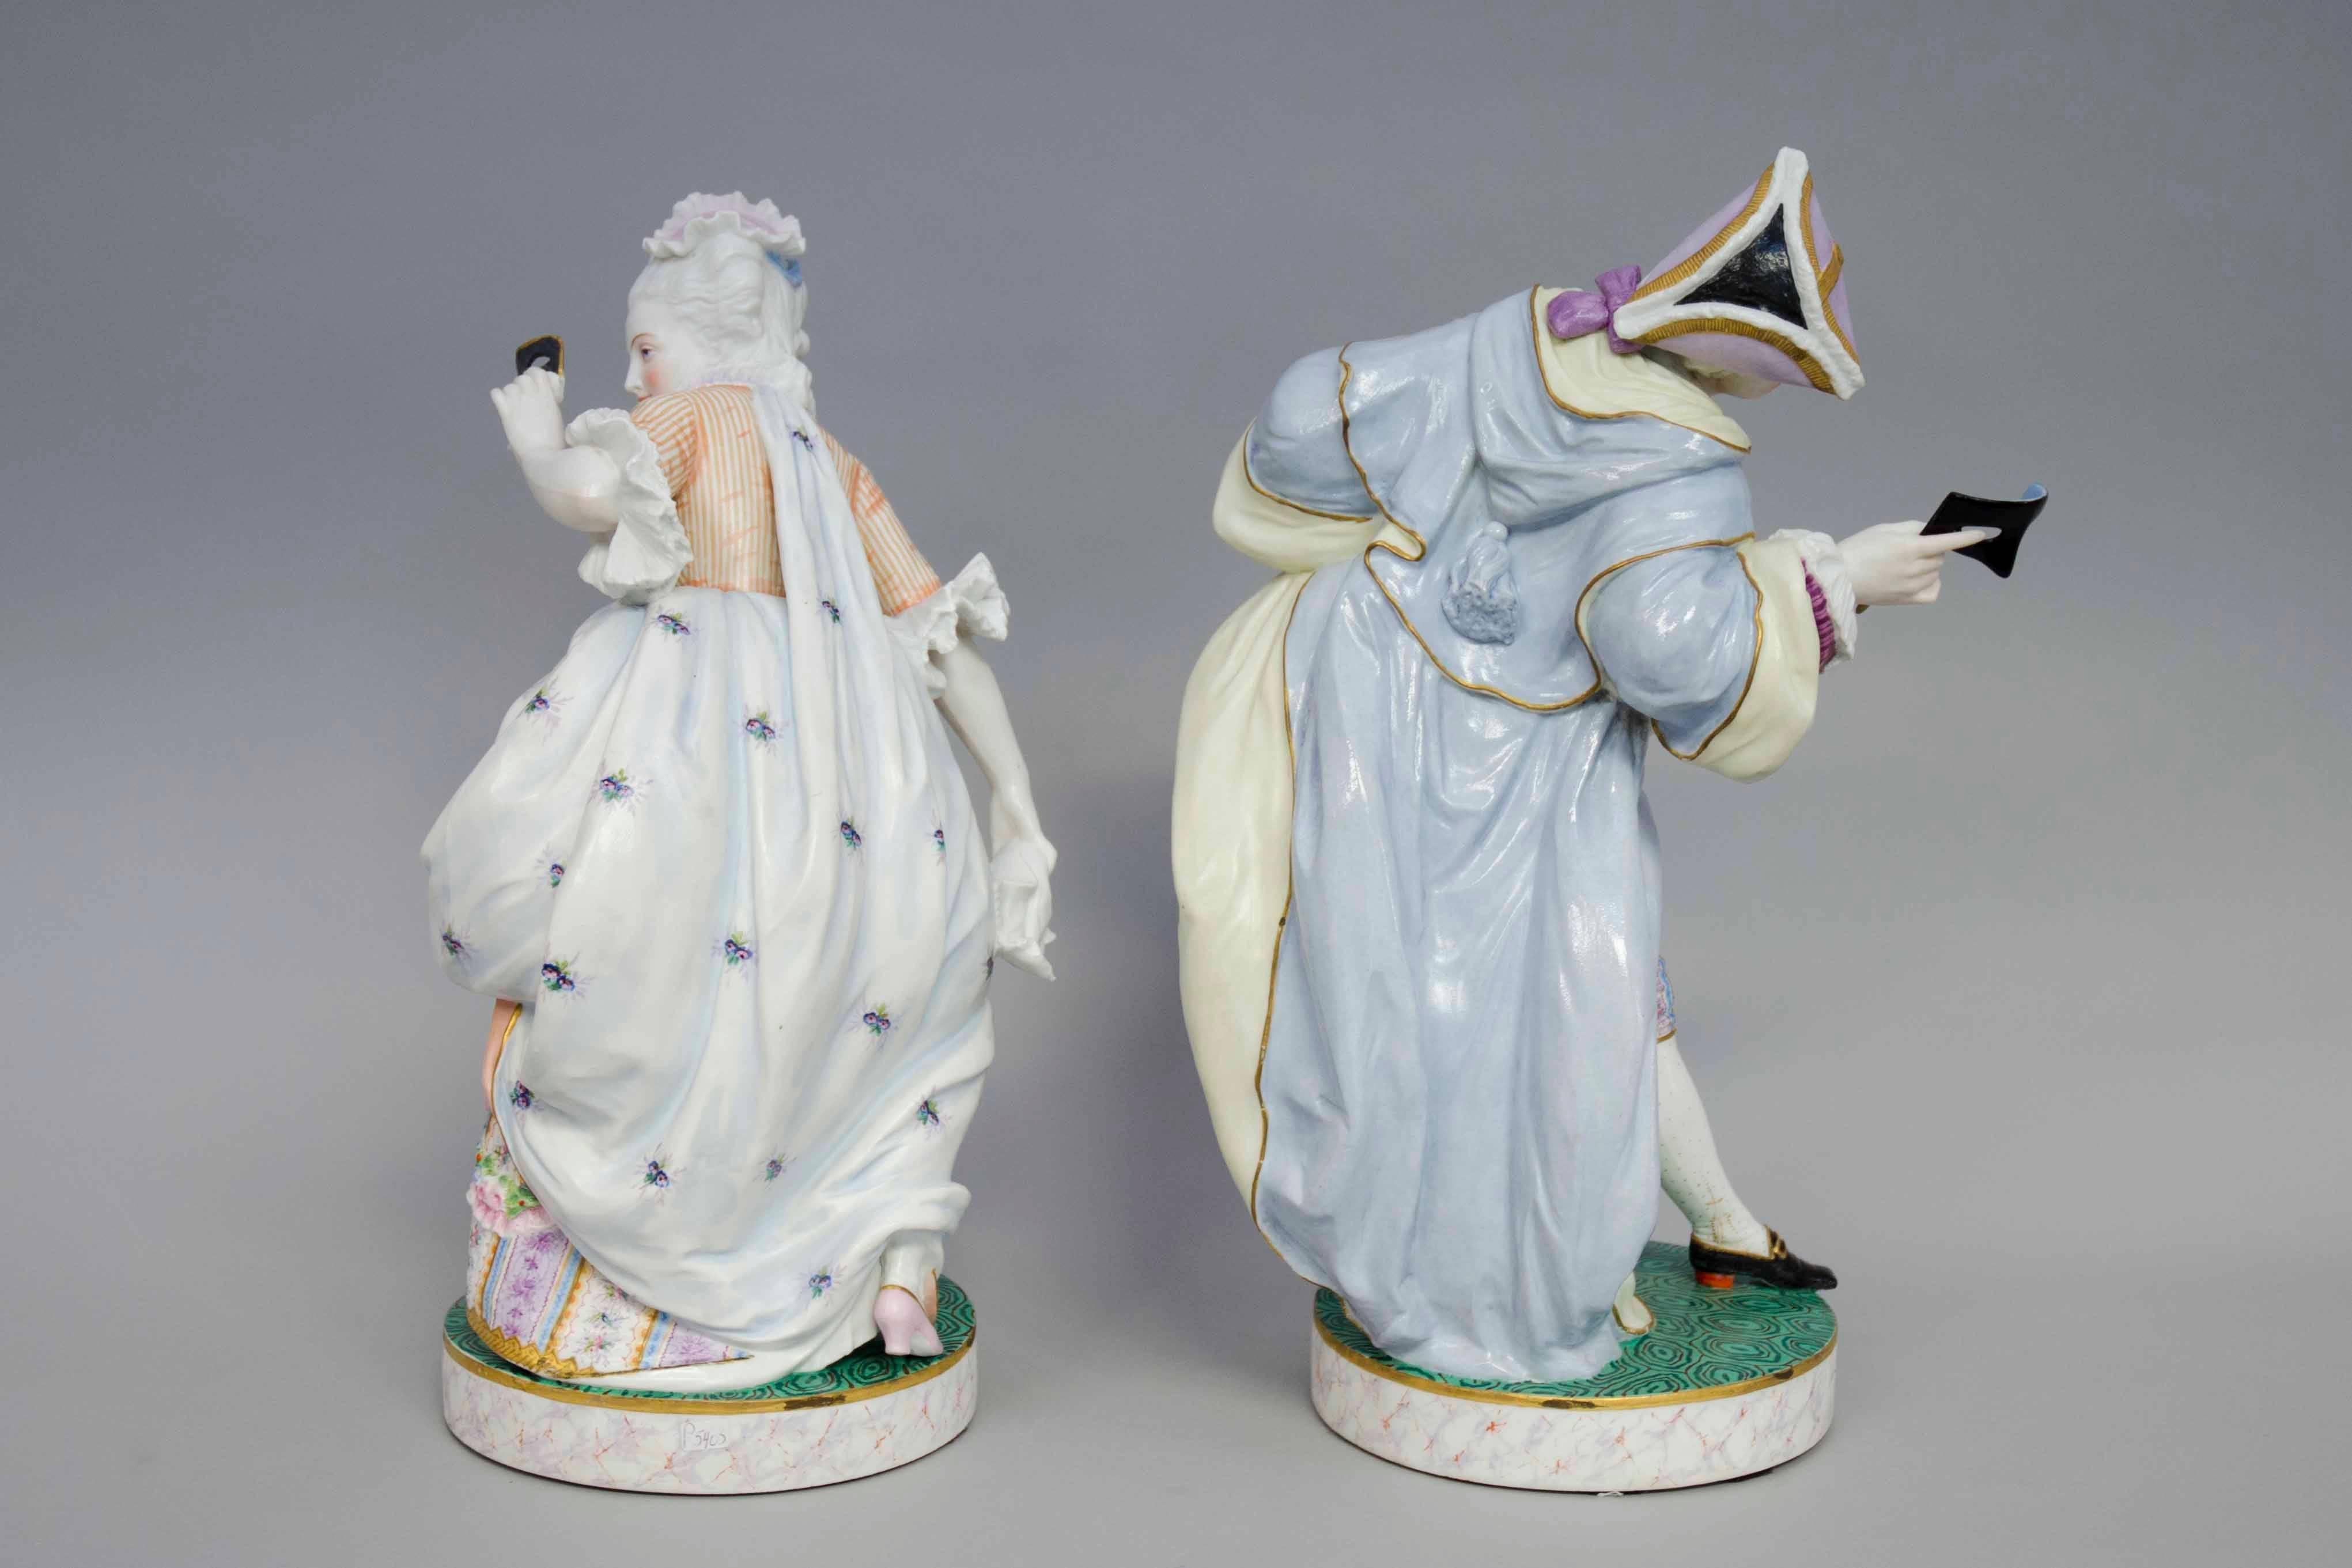 19th Century polychrome Bisque court figures, Vion et Baury in Paris In Excellent Condition For Sale In Brussels, BE